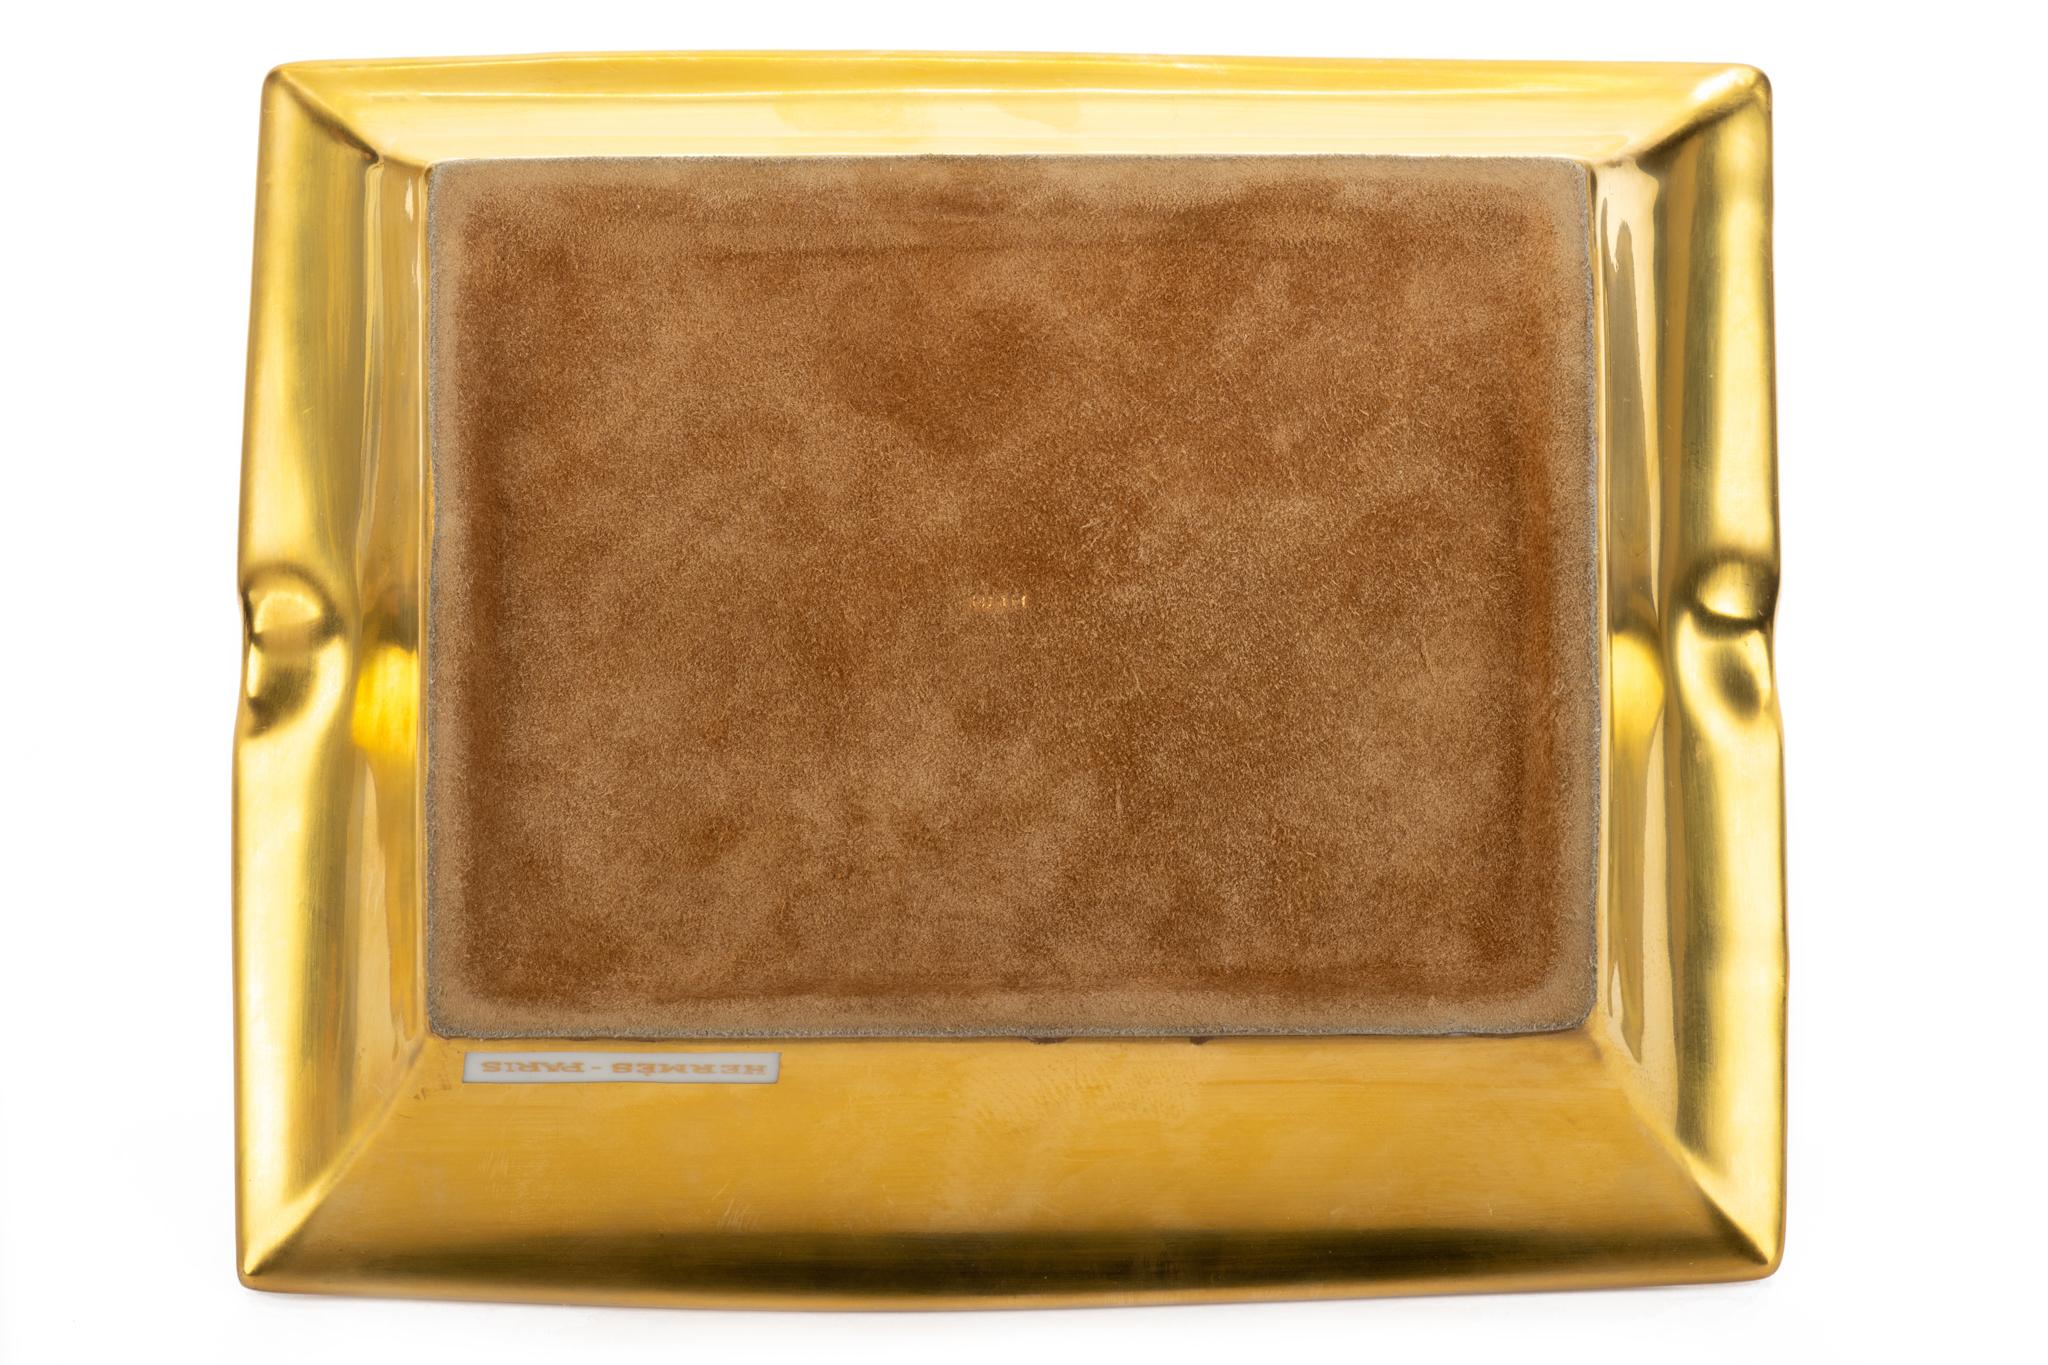 Hermes signature porcelain ashtray with bird design in yellow, white an gold. Suede stamped bottom. Made in France.